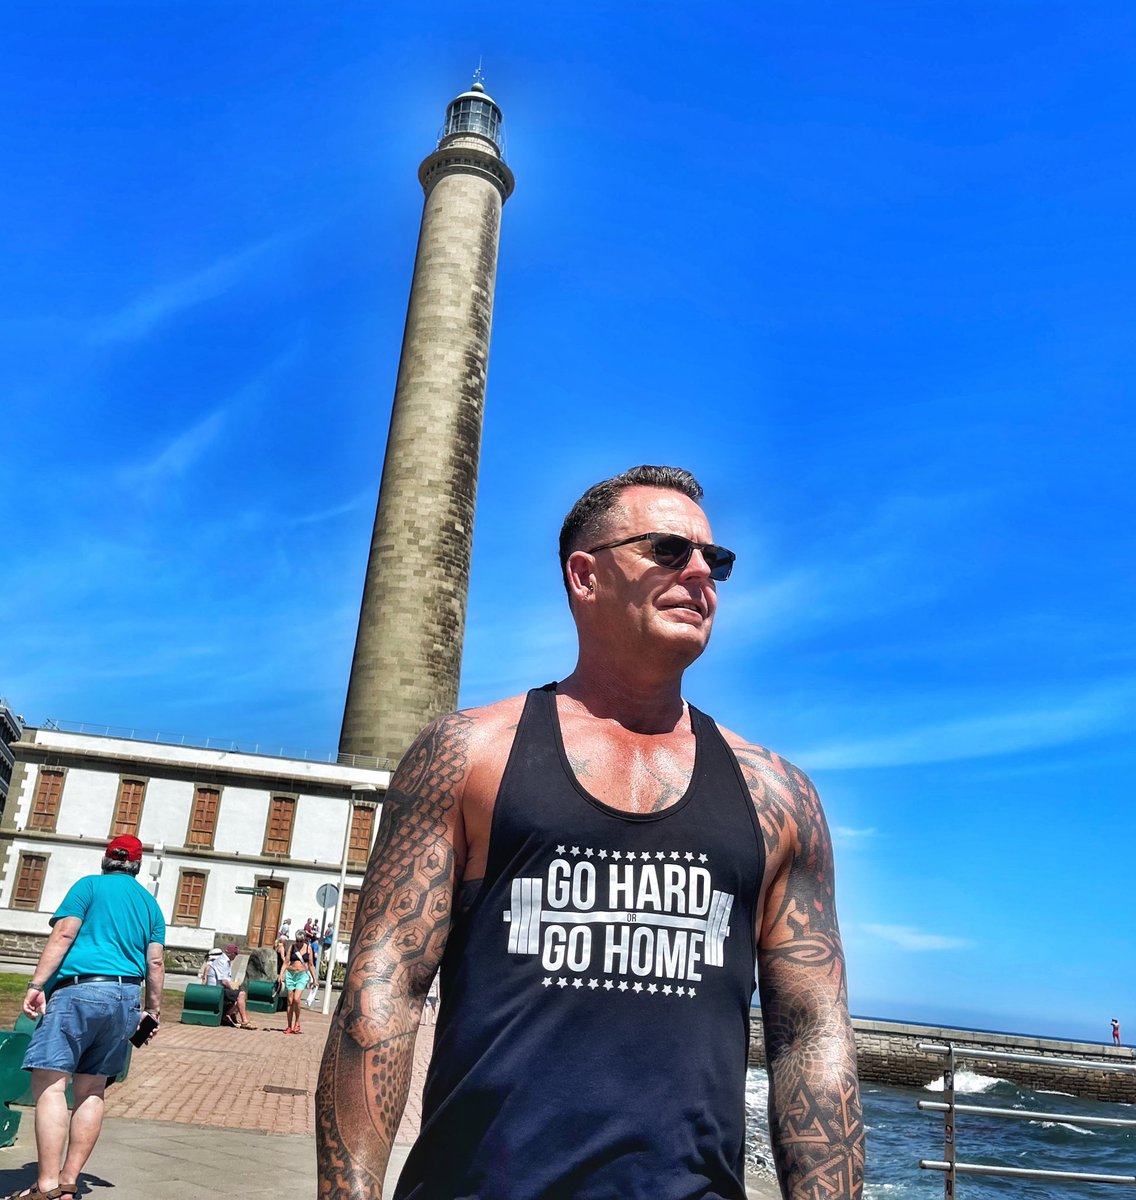 As the press would say, this is my “rarely seen” husband. He’s not a hermit, he’s just not that into social media, but was happy for me to share this one from this afternoon ❤️ #husbands #lgbt #maspalomas #gaypride #grancanariapride #gaygrancanaria #gym #gayfit #tattoos